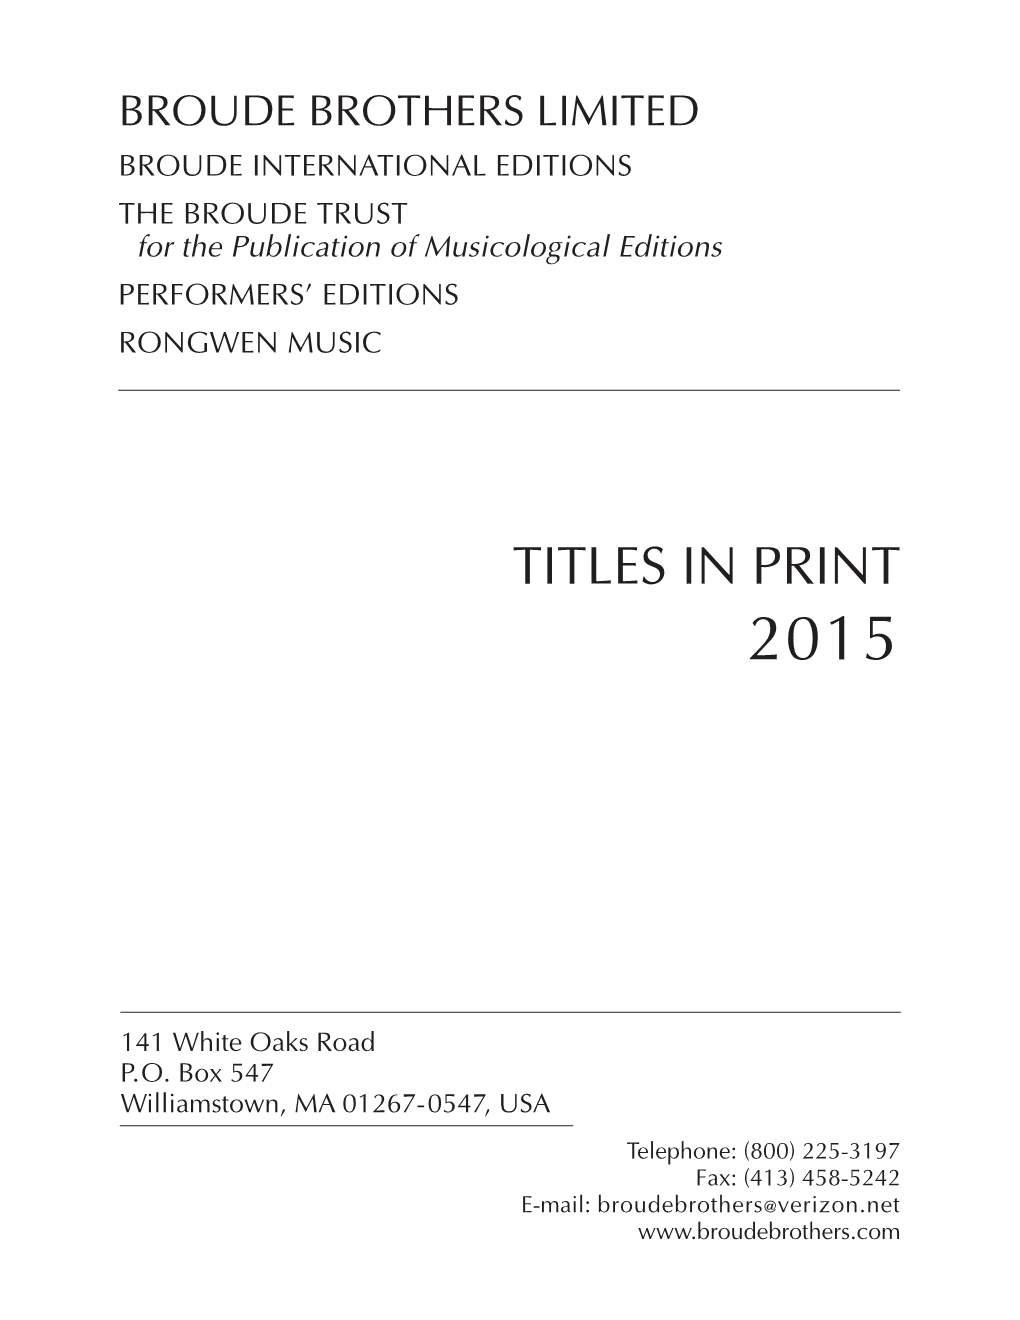 Titles in Print 2015